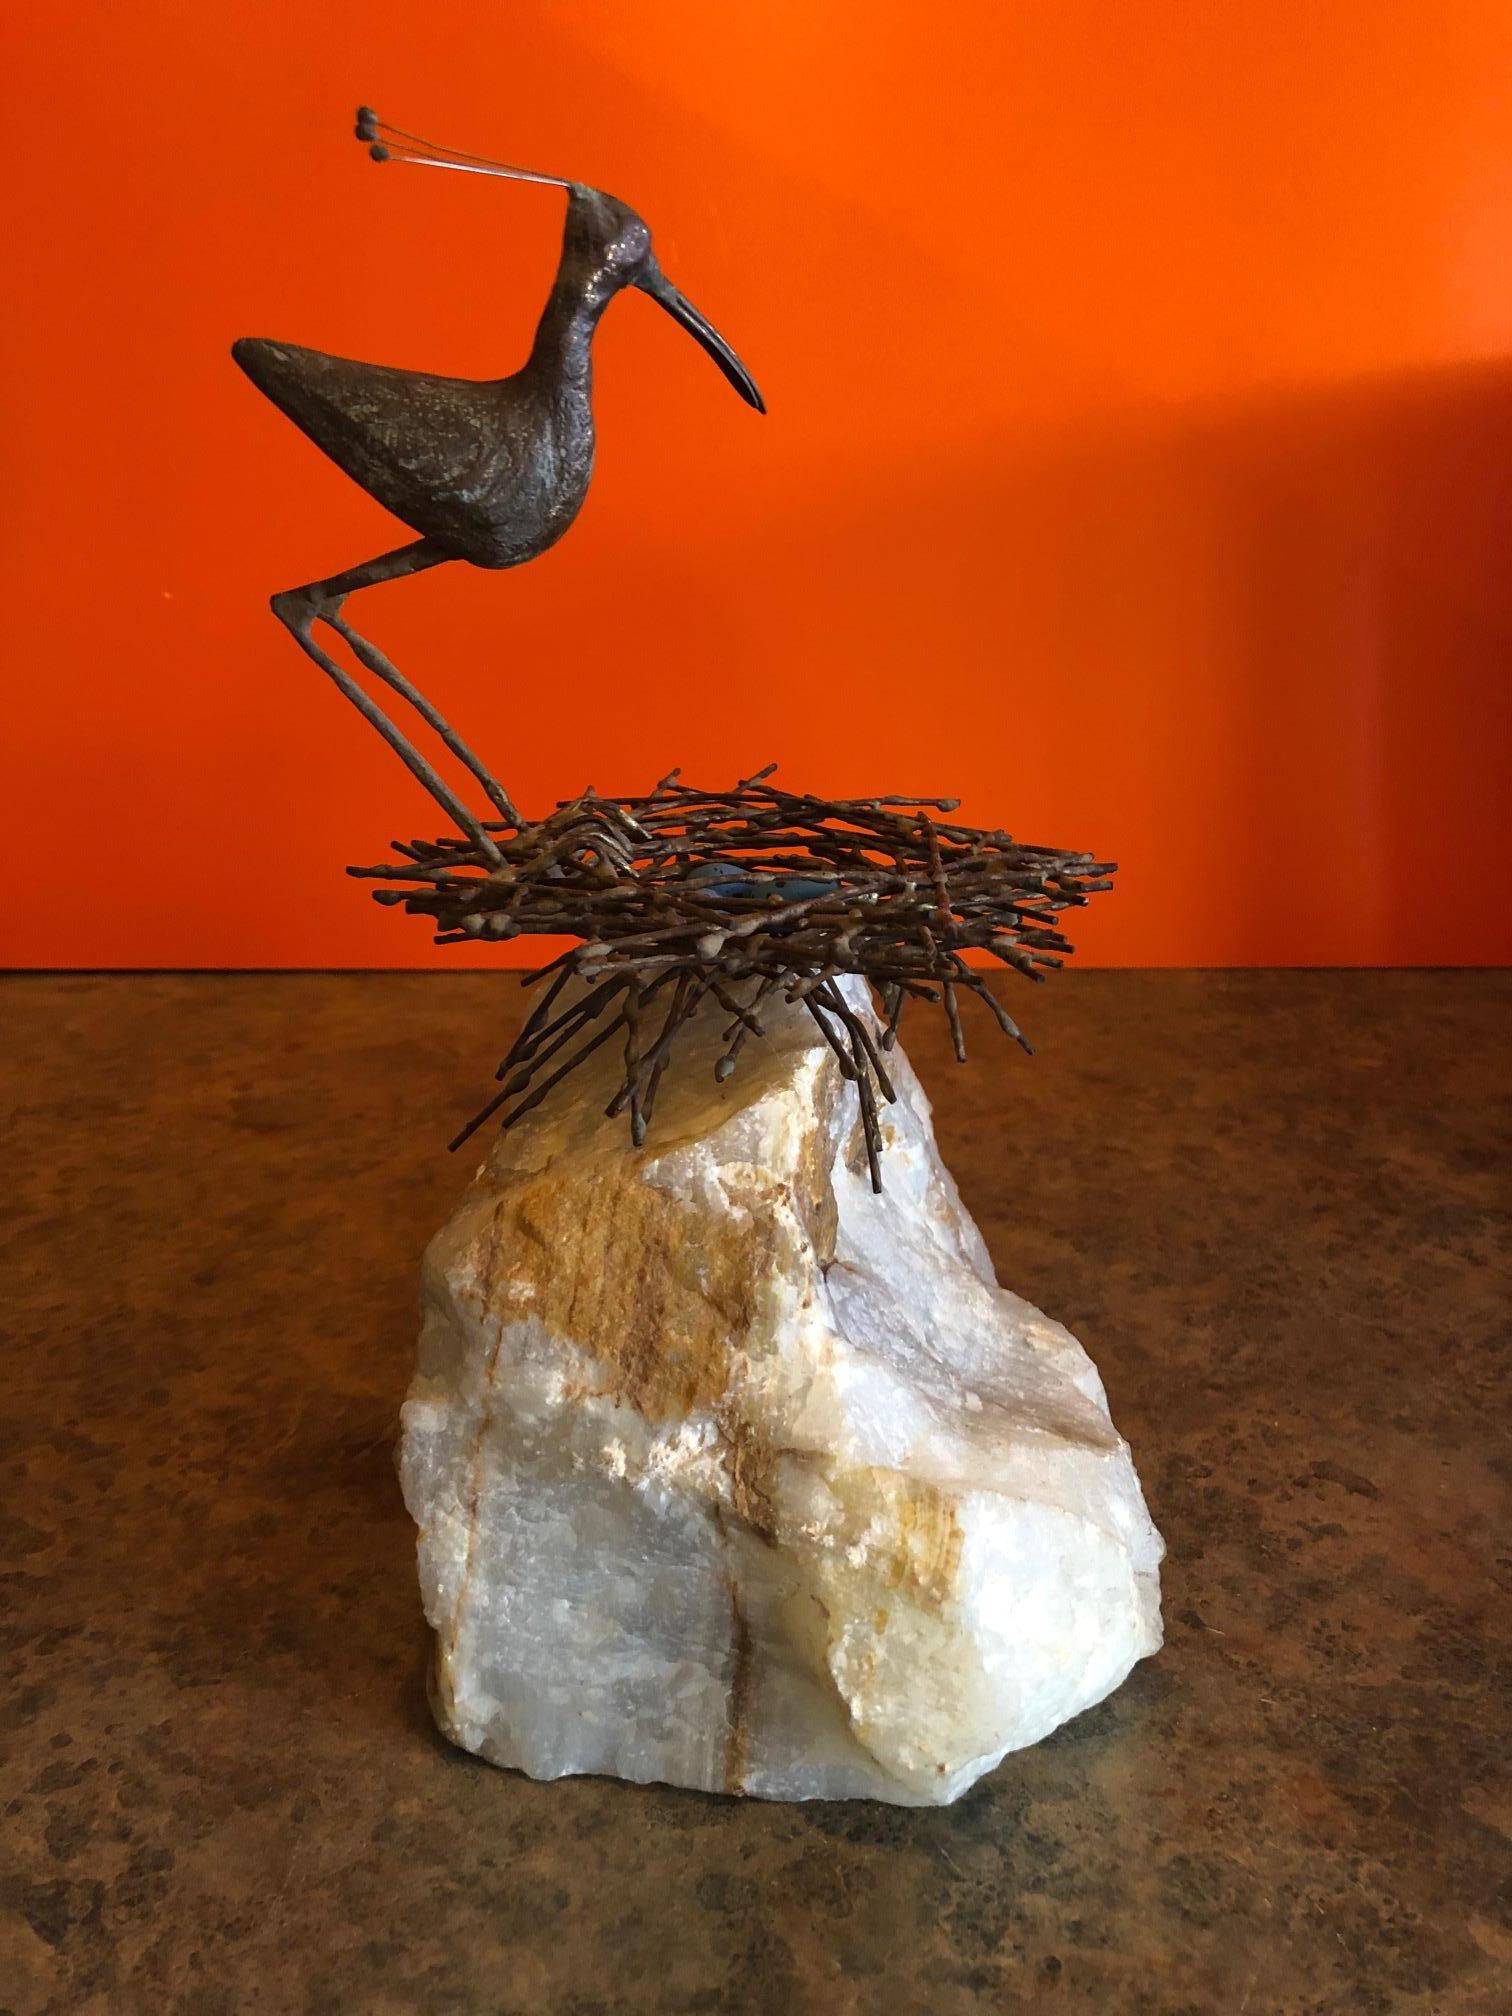 A very cool bird or sandpiper in nest sculpture on a solid block of white quartz by Curtis Jere, circa 1969. The bird and nest are made of welded metal with a gold overlay and there are three light blue eggs in the nest. The piece is signed 